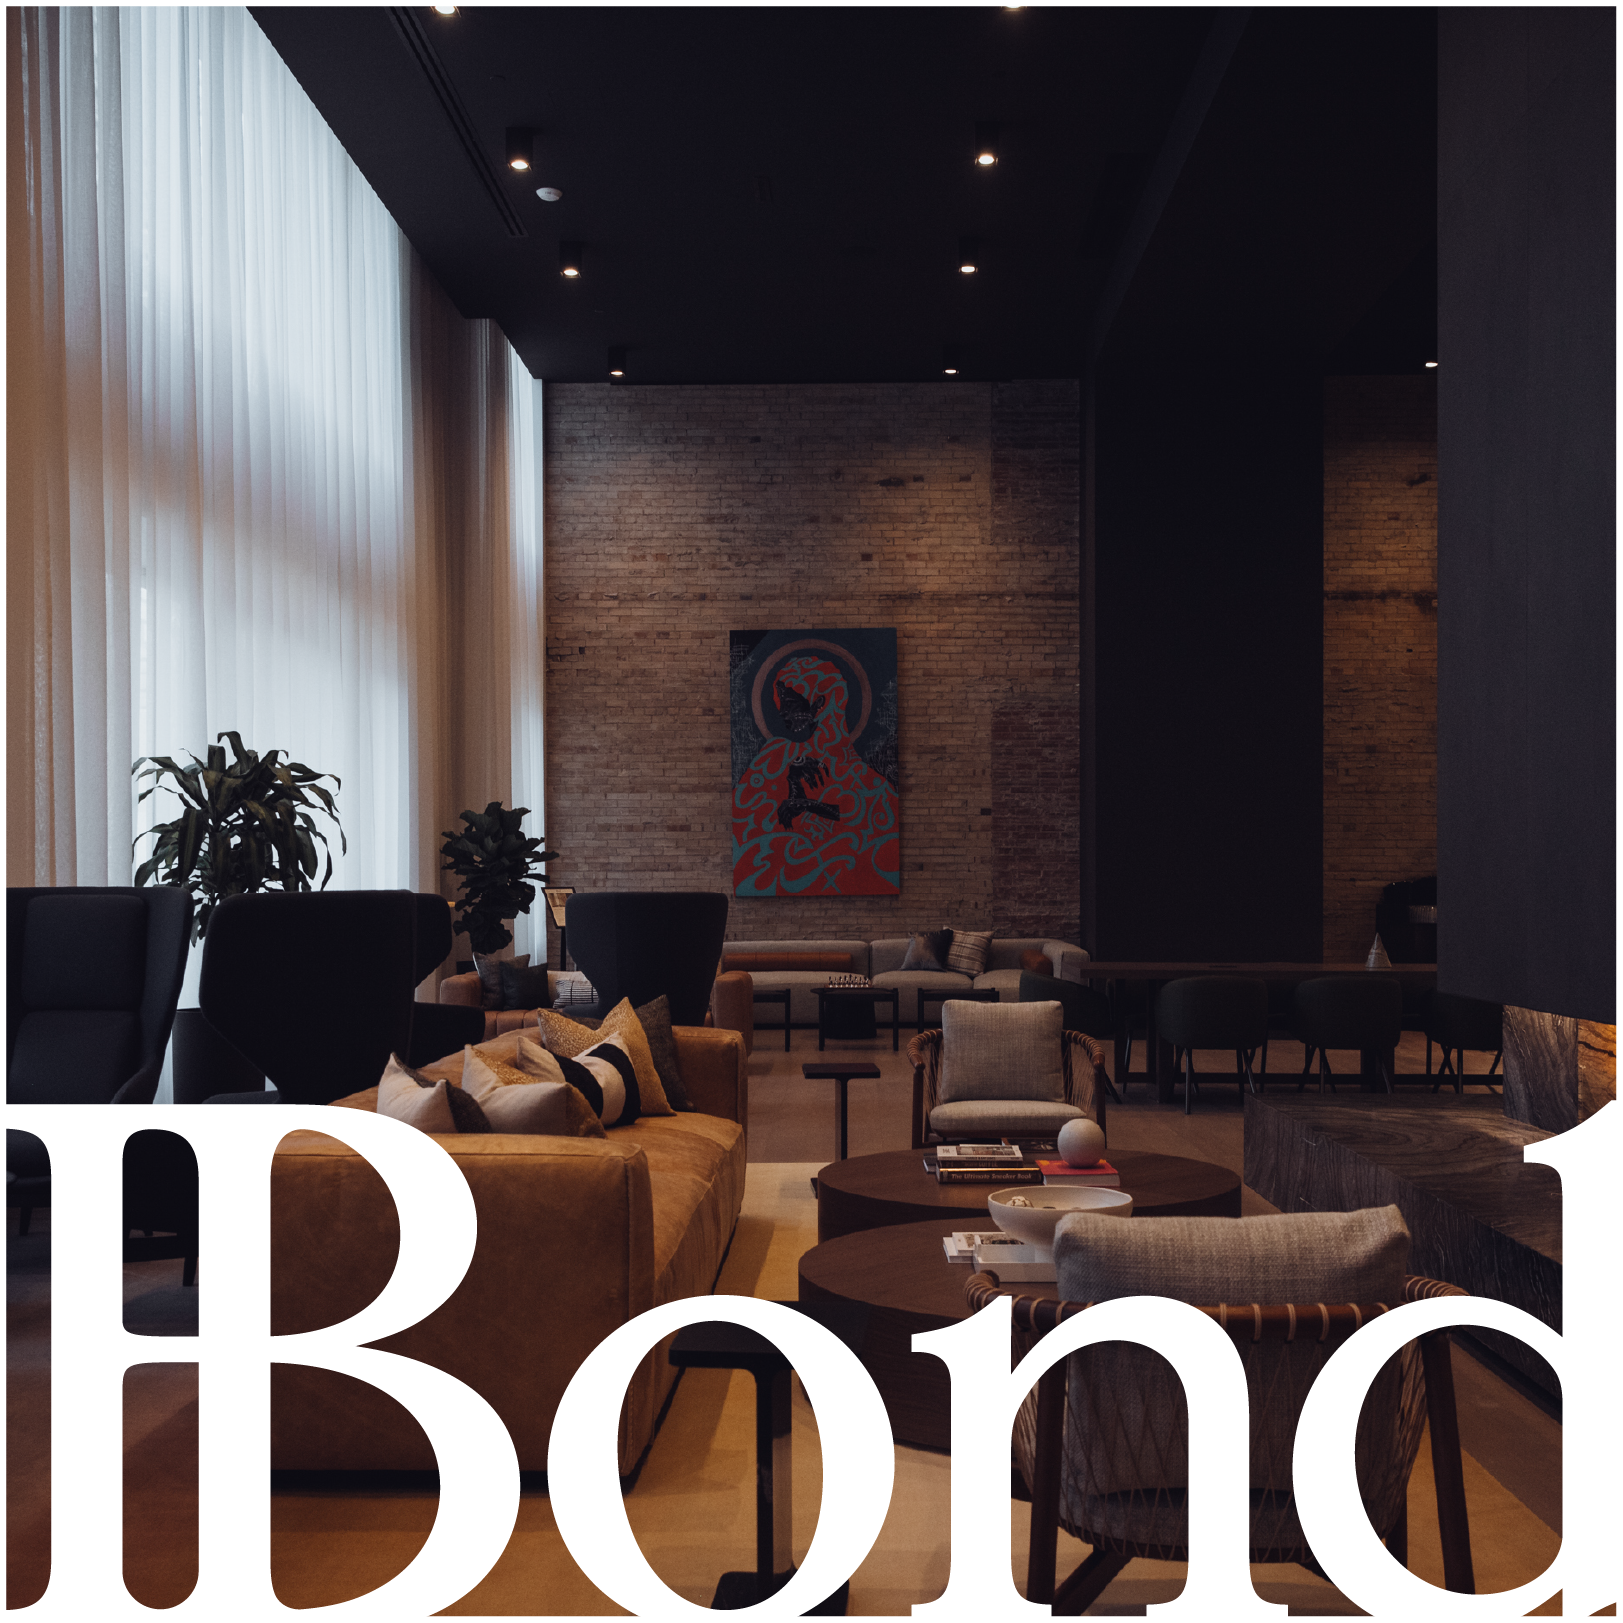 Decorative image with the wordmark 'BOND' laid over an image of the new amenity space by the same name.